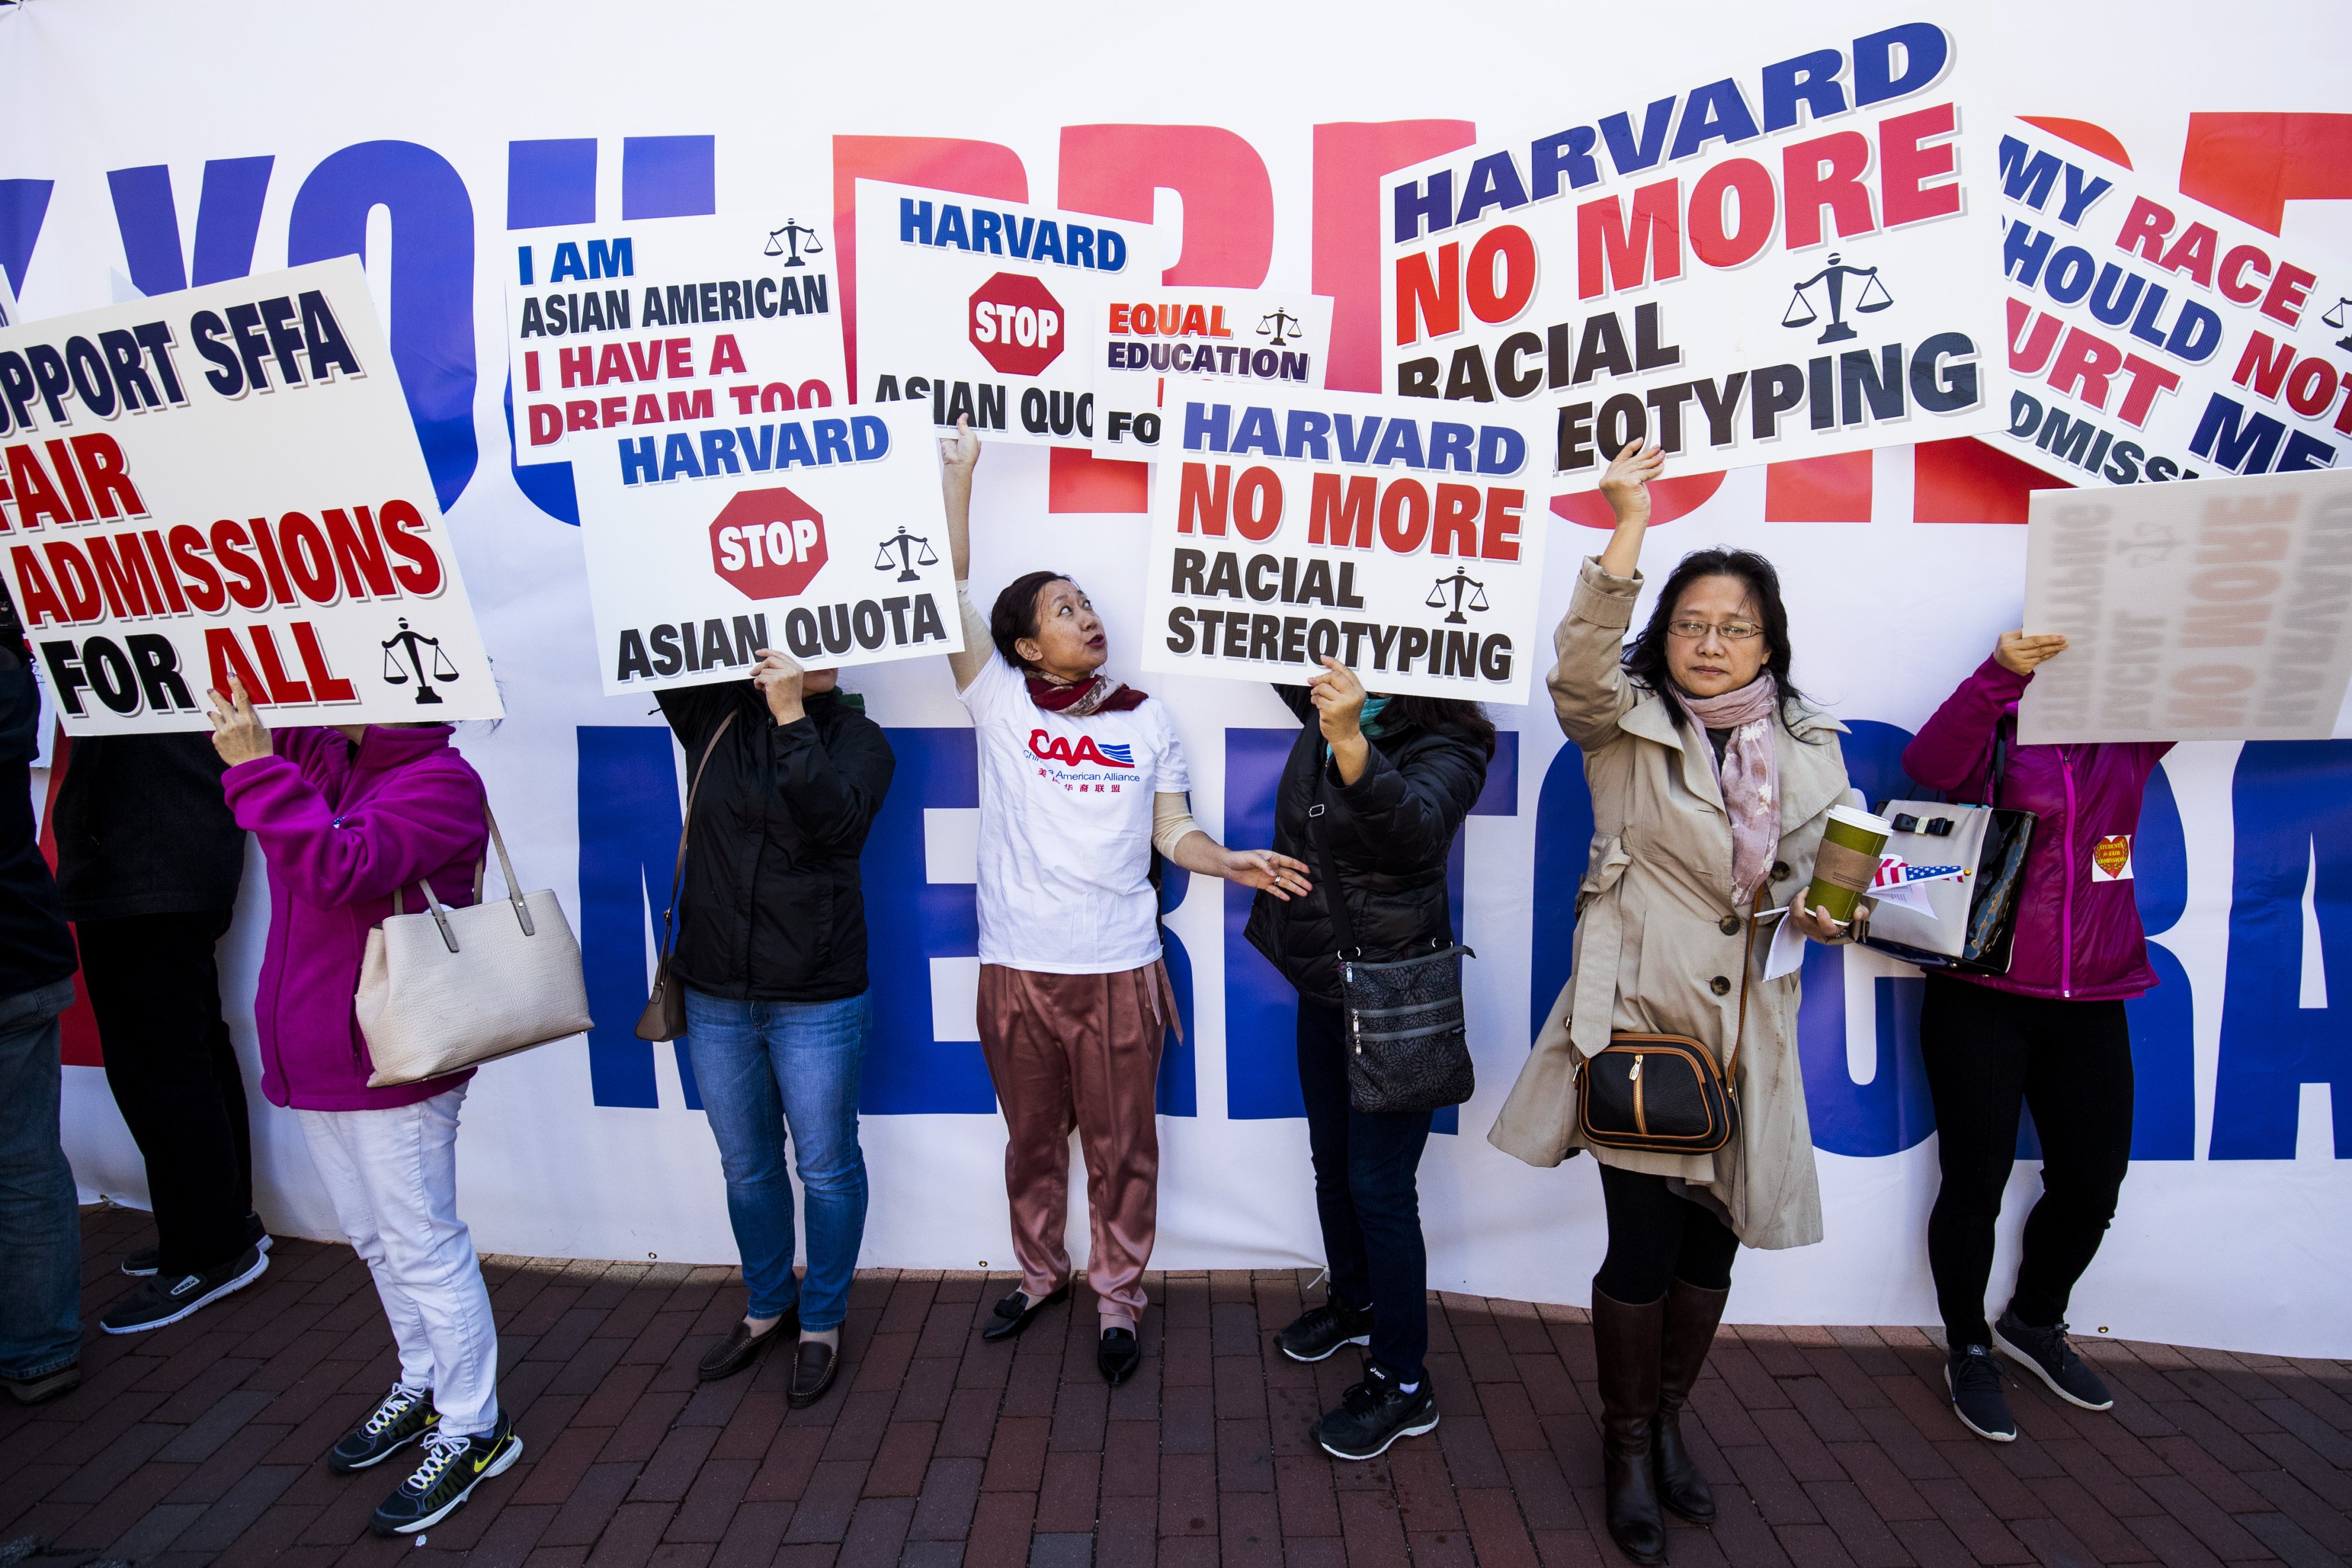 Demonstrators protests against Harvard University’s admission process at Copley Square in Boston, Massachusetts, on October 14, 2018. Since 2014, Students for Fair Admissions, an anti-affirmative action group, has been fighting a case against Harvard for an unfair admissions policy it says discriminates against Asian-Americans. Photo: Bloomberg